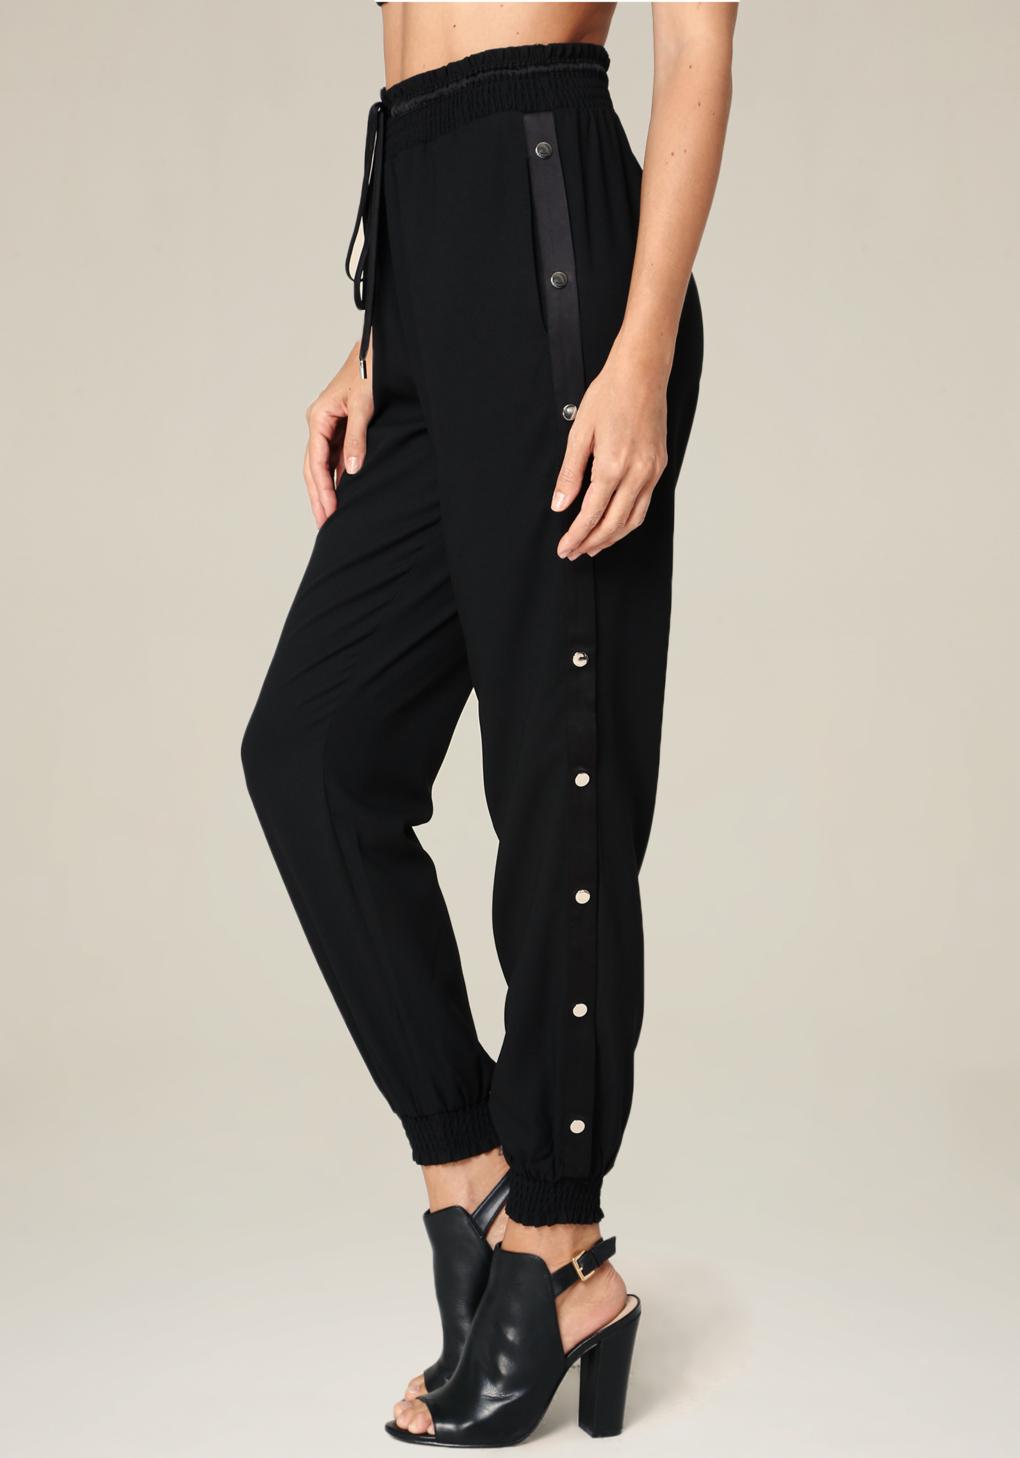 Bebe Synthetic Snap Jogger Pants in Black - Lyst